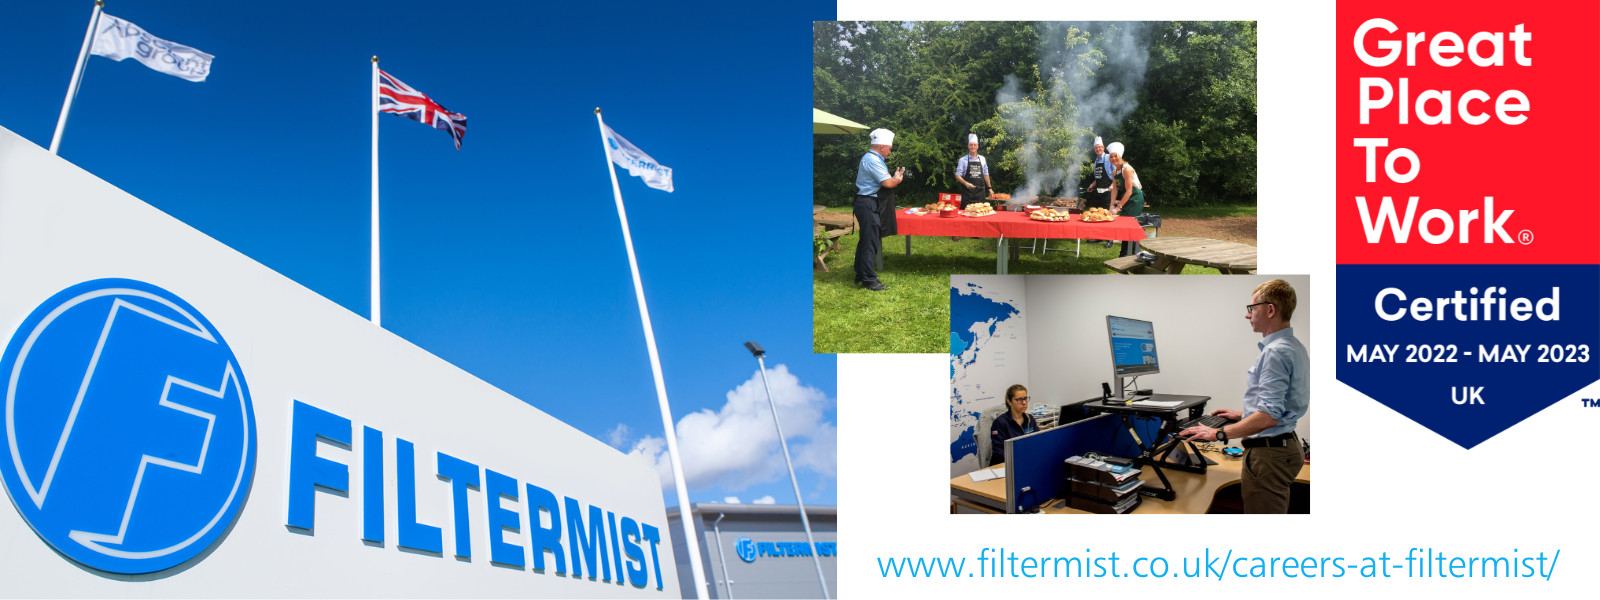 Filtermist Group is Great Place to Work-Certified™